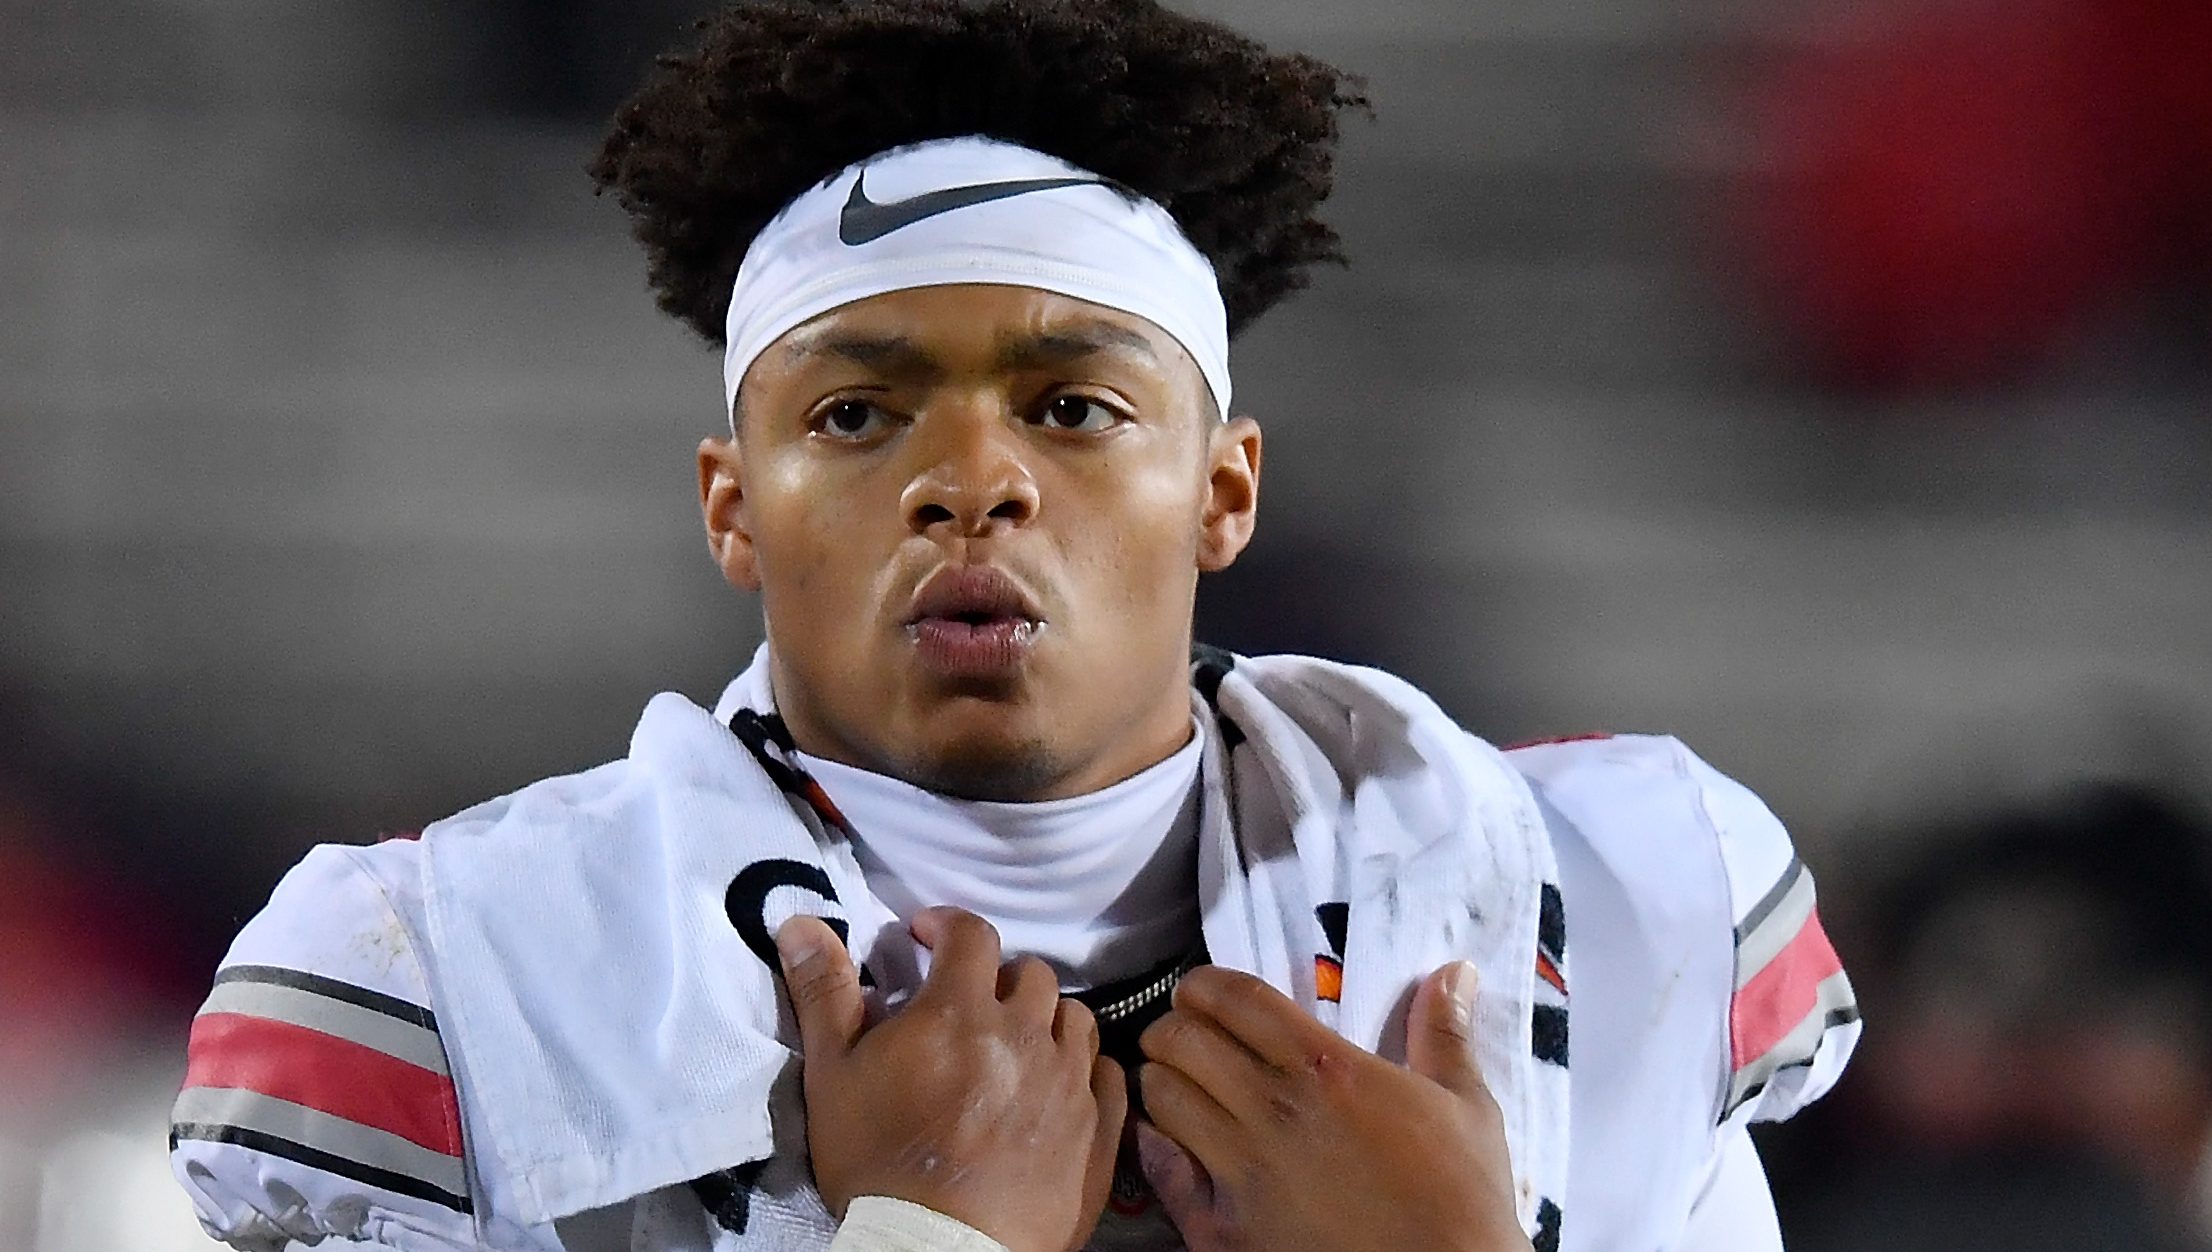 First Look at QB Justin Fields in His Chicago Bears Jersey